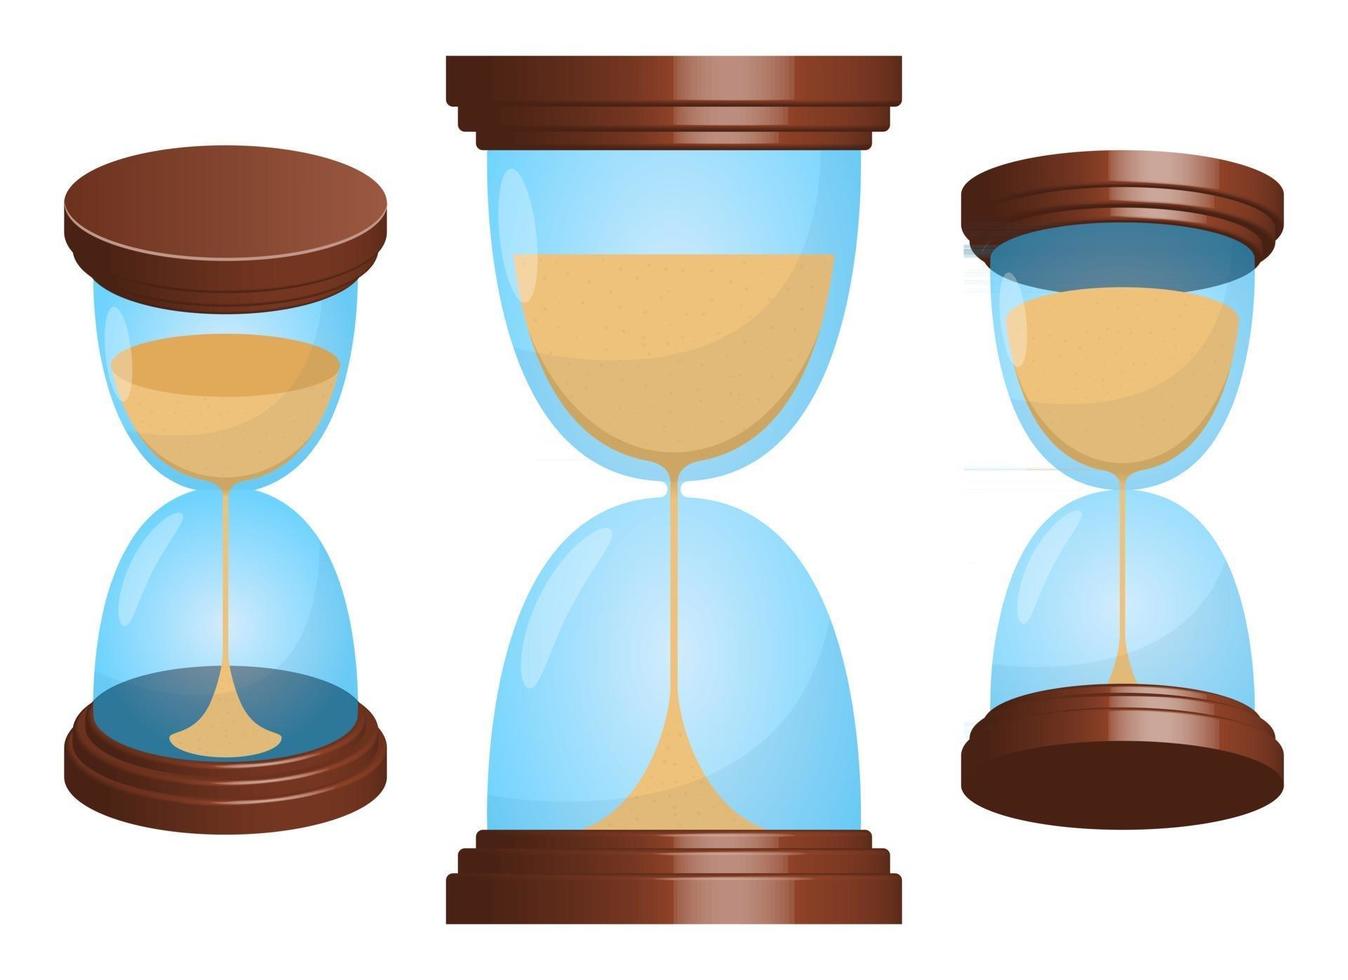 Hourglass vector design illustration isolated on white background